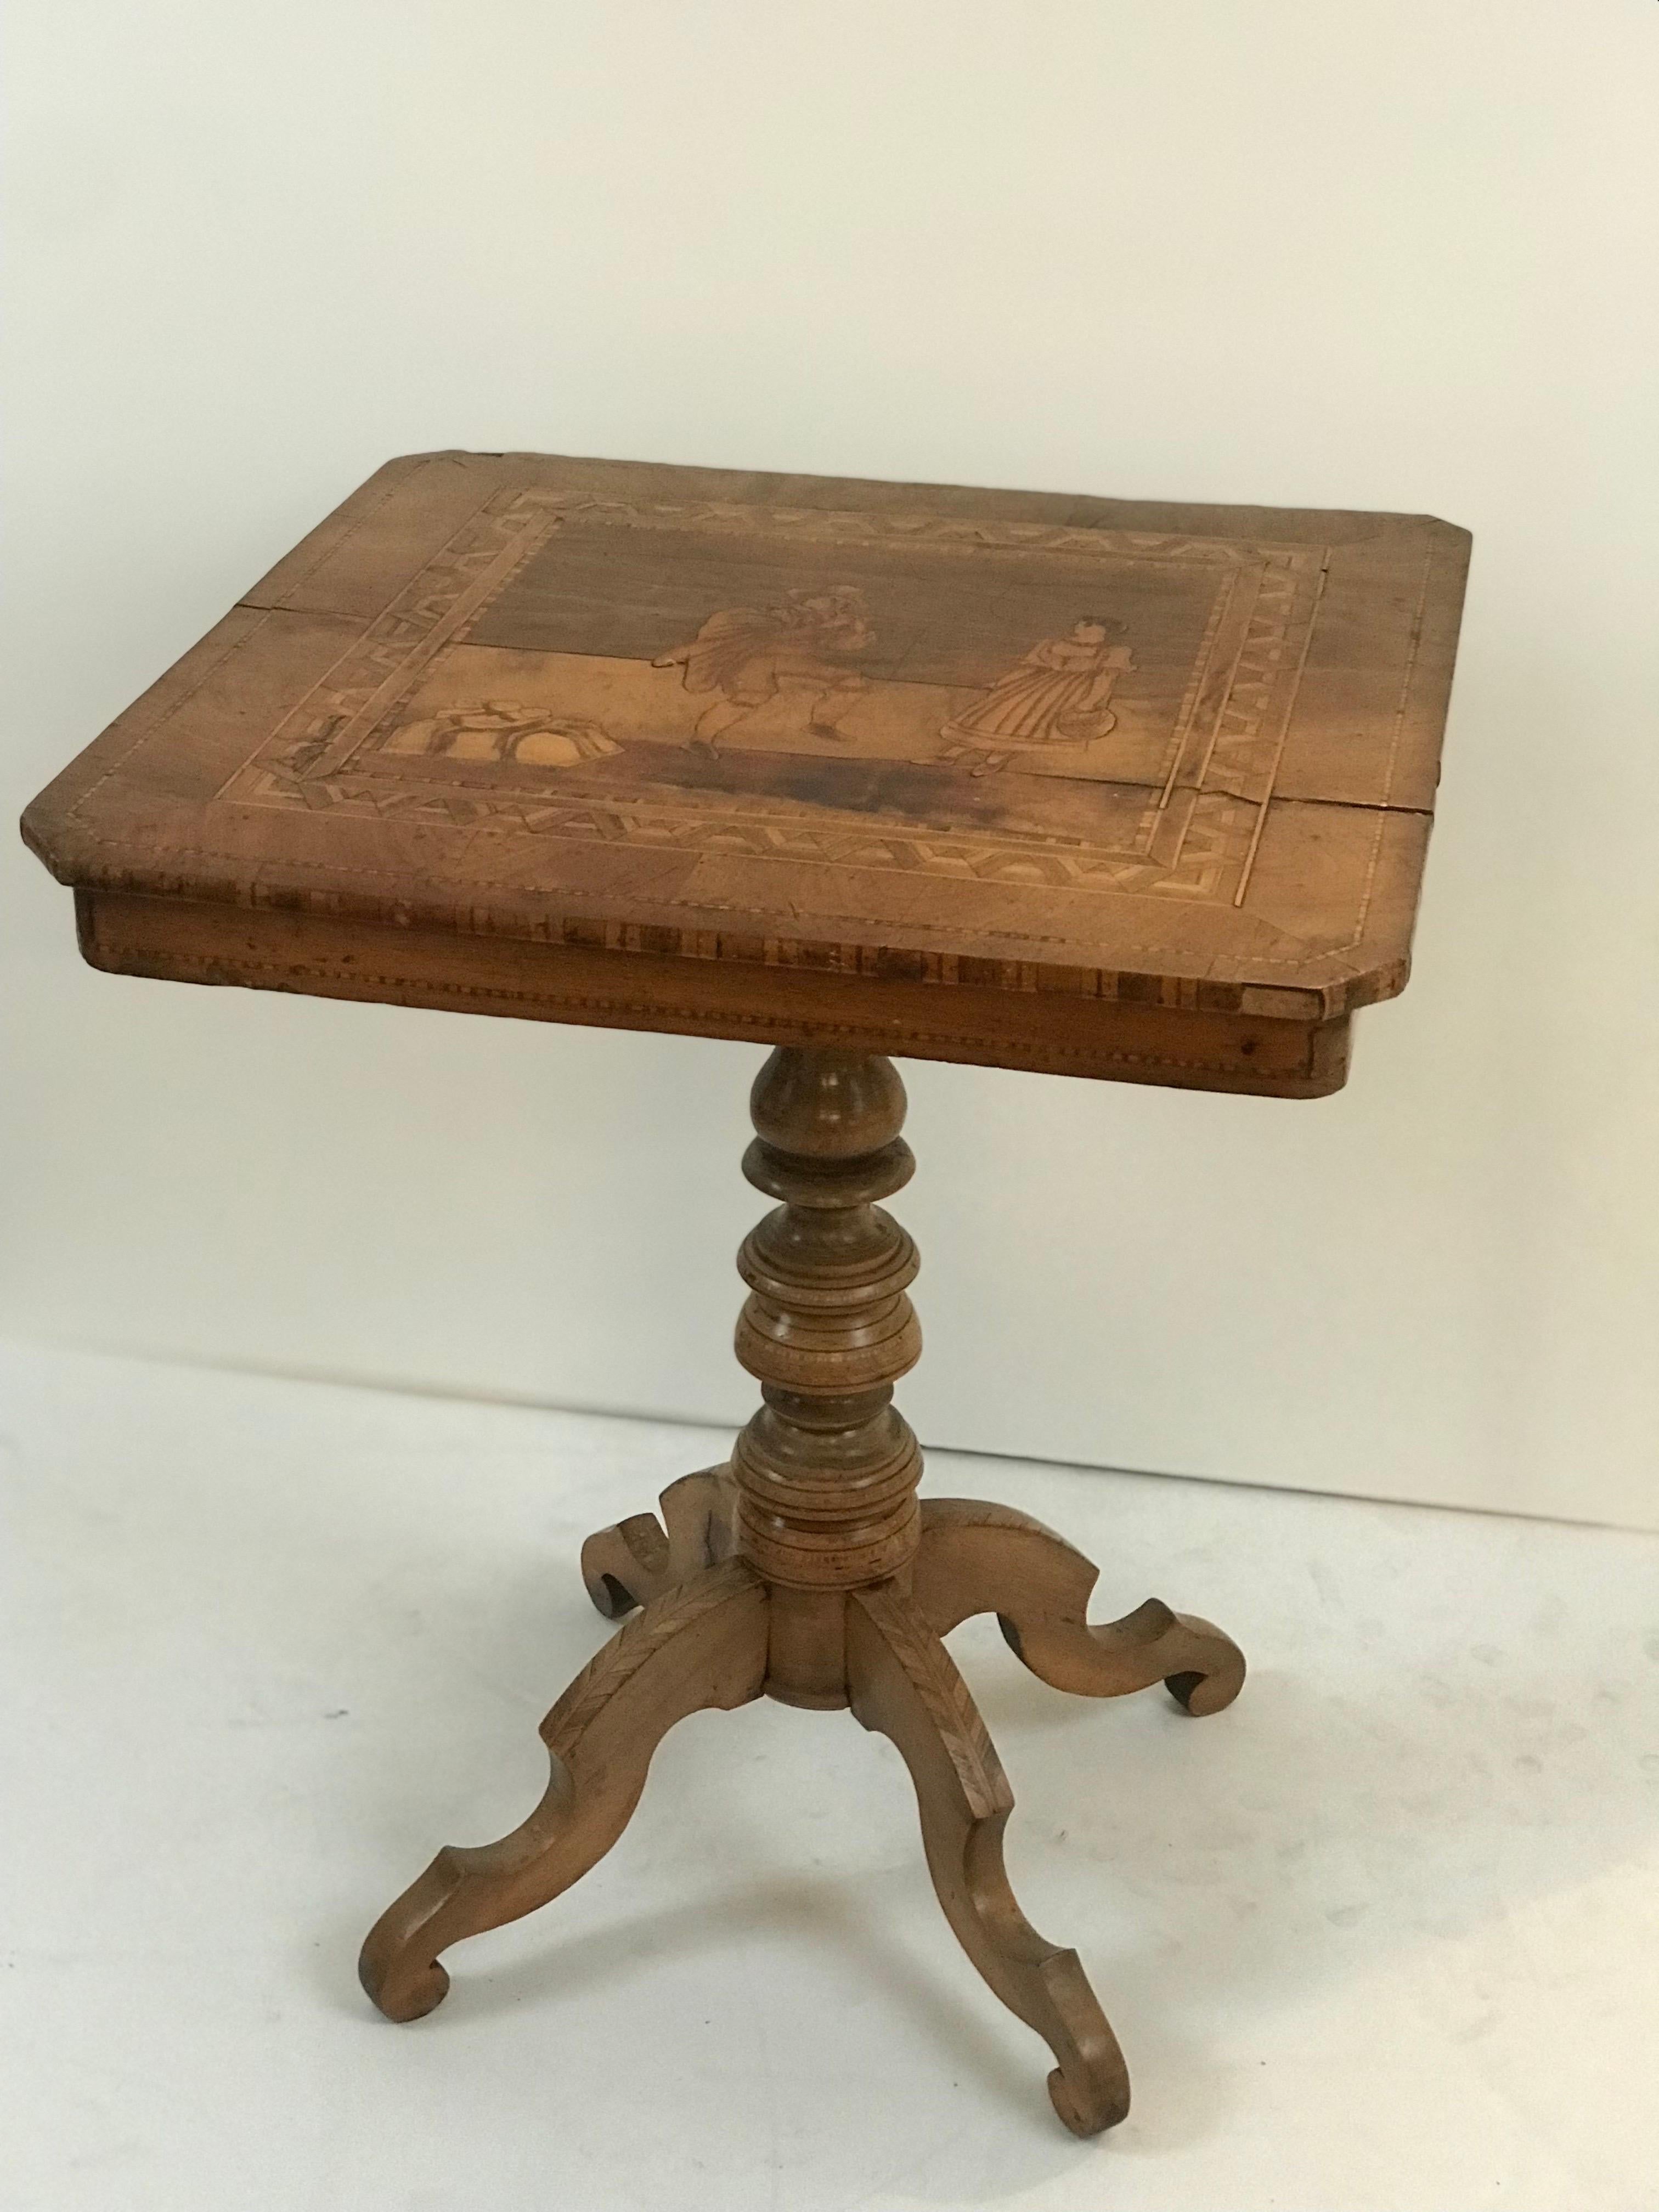 A highly decorative and complicated late 1800's Sorrento marquetry occasional table using a wide variety of woods and textures and featuring a center motif of a travelling minstrel in tradigital Renaissance attire serenading a milk maid playing his